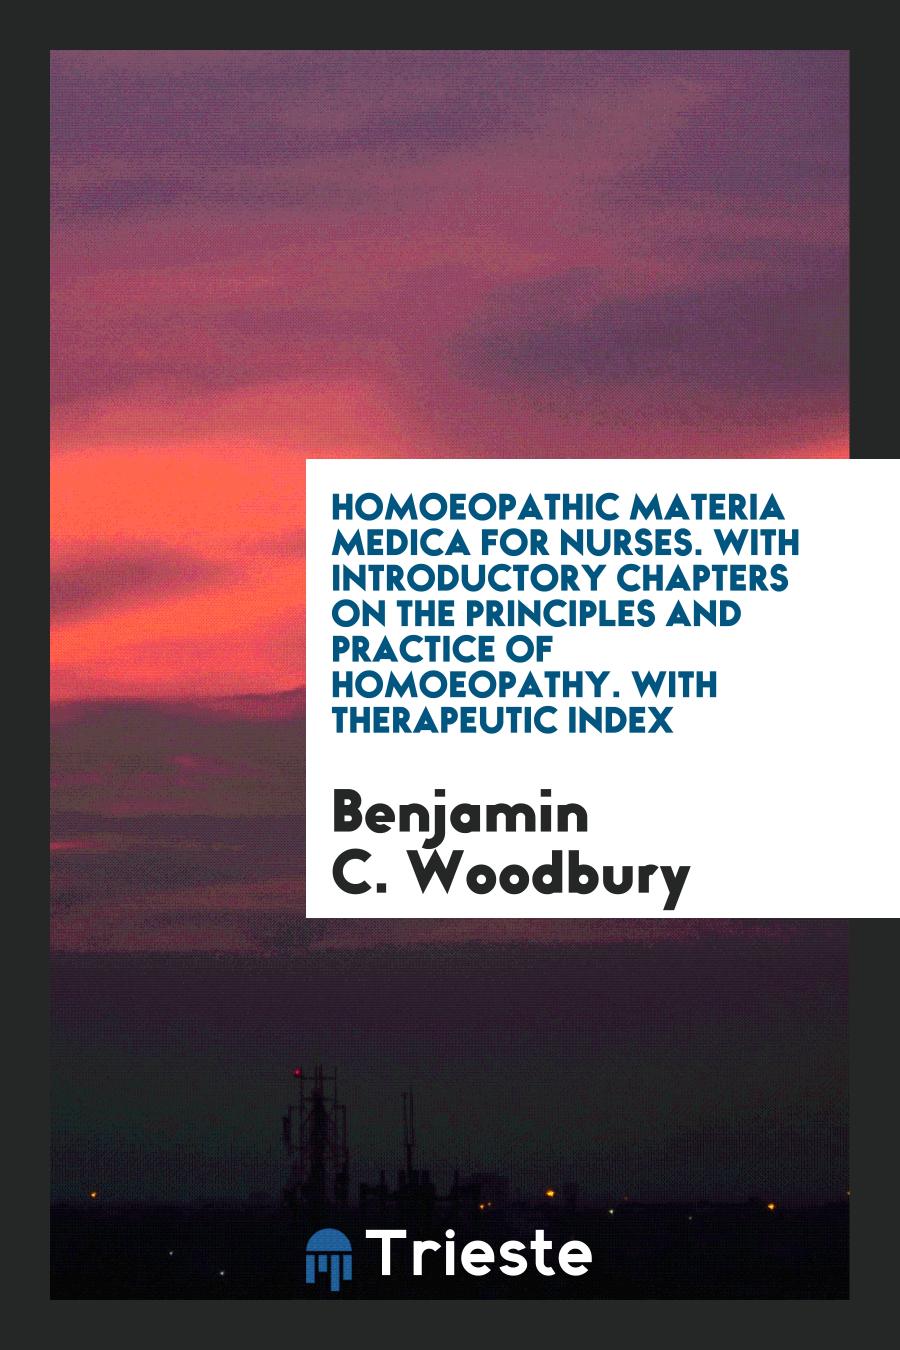 Homoeopathic Materia Medica for Nurses. With Introductory Chapters on the Principles and Practice of Homoeopathy. With Therapeutic Index